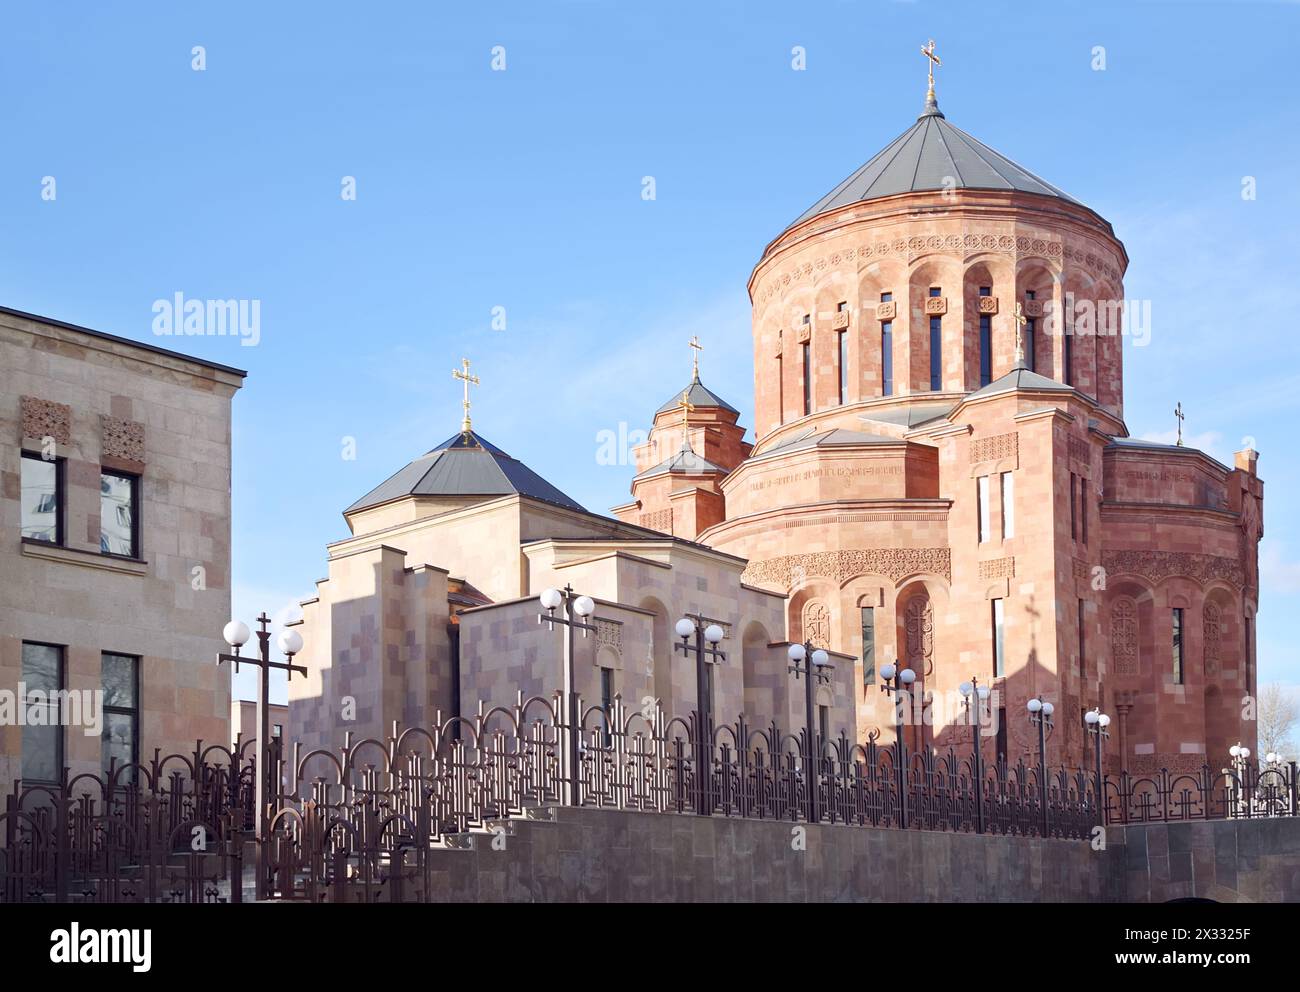 Cathedral Armenian church Surb Khach (Holy Cross) and stairs with lanterns in Moscow, Russia. Stock Photo